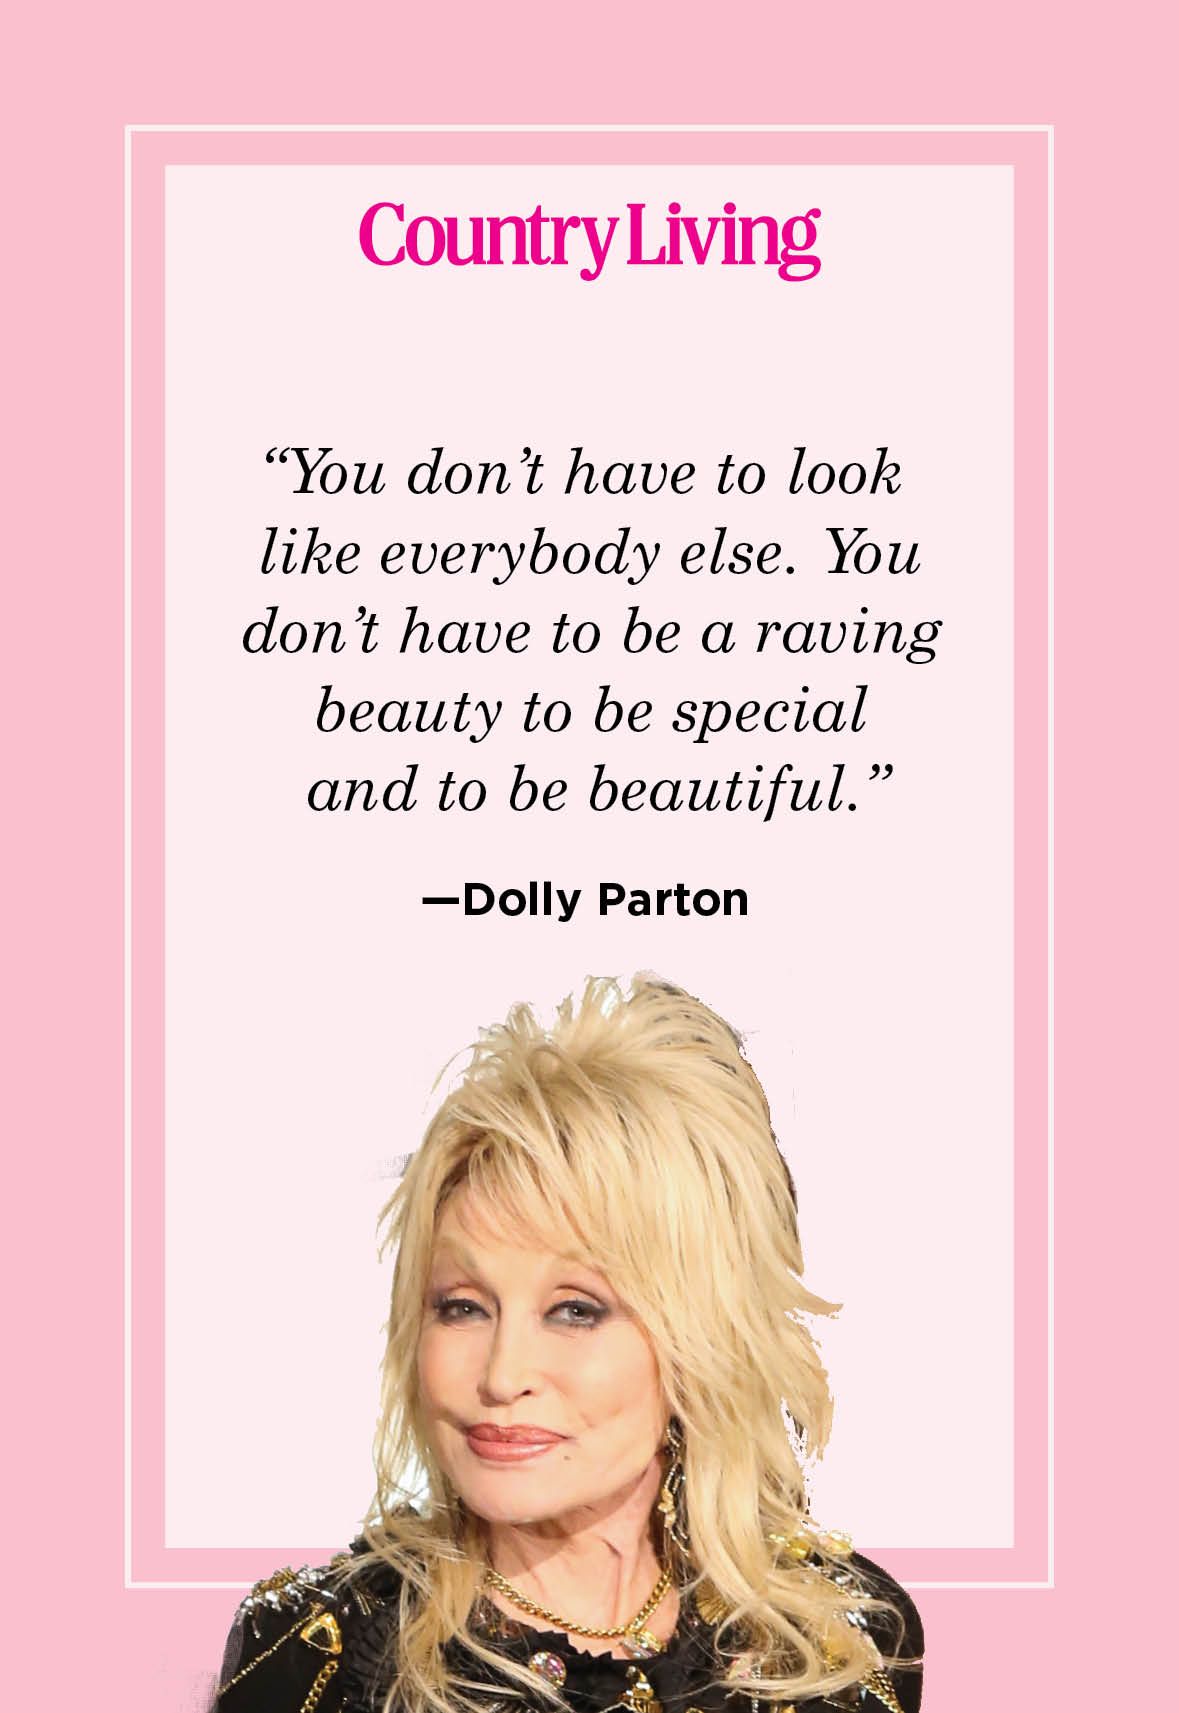 699132 download wallpaper love quote Dolly Parton quote  Rare Gallery HD  Wallpapers